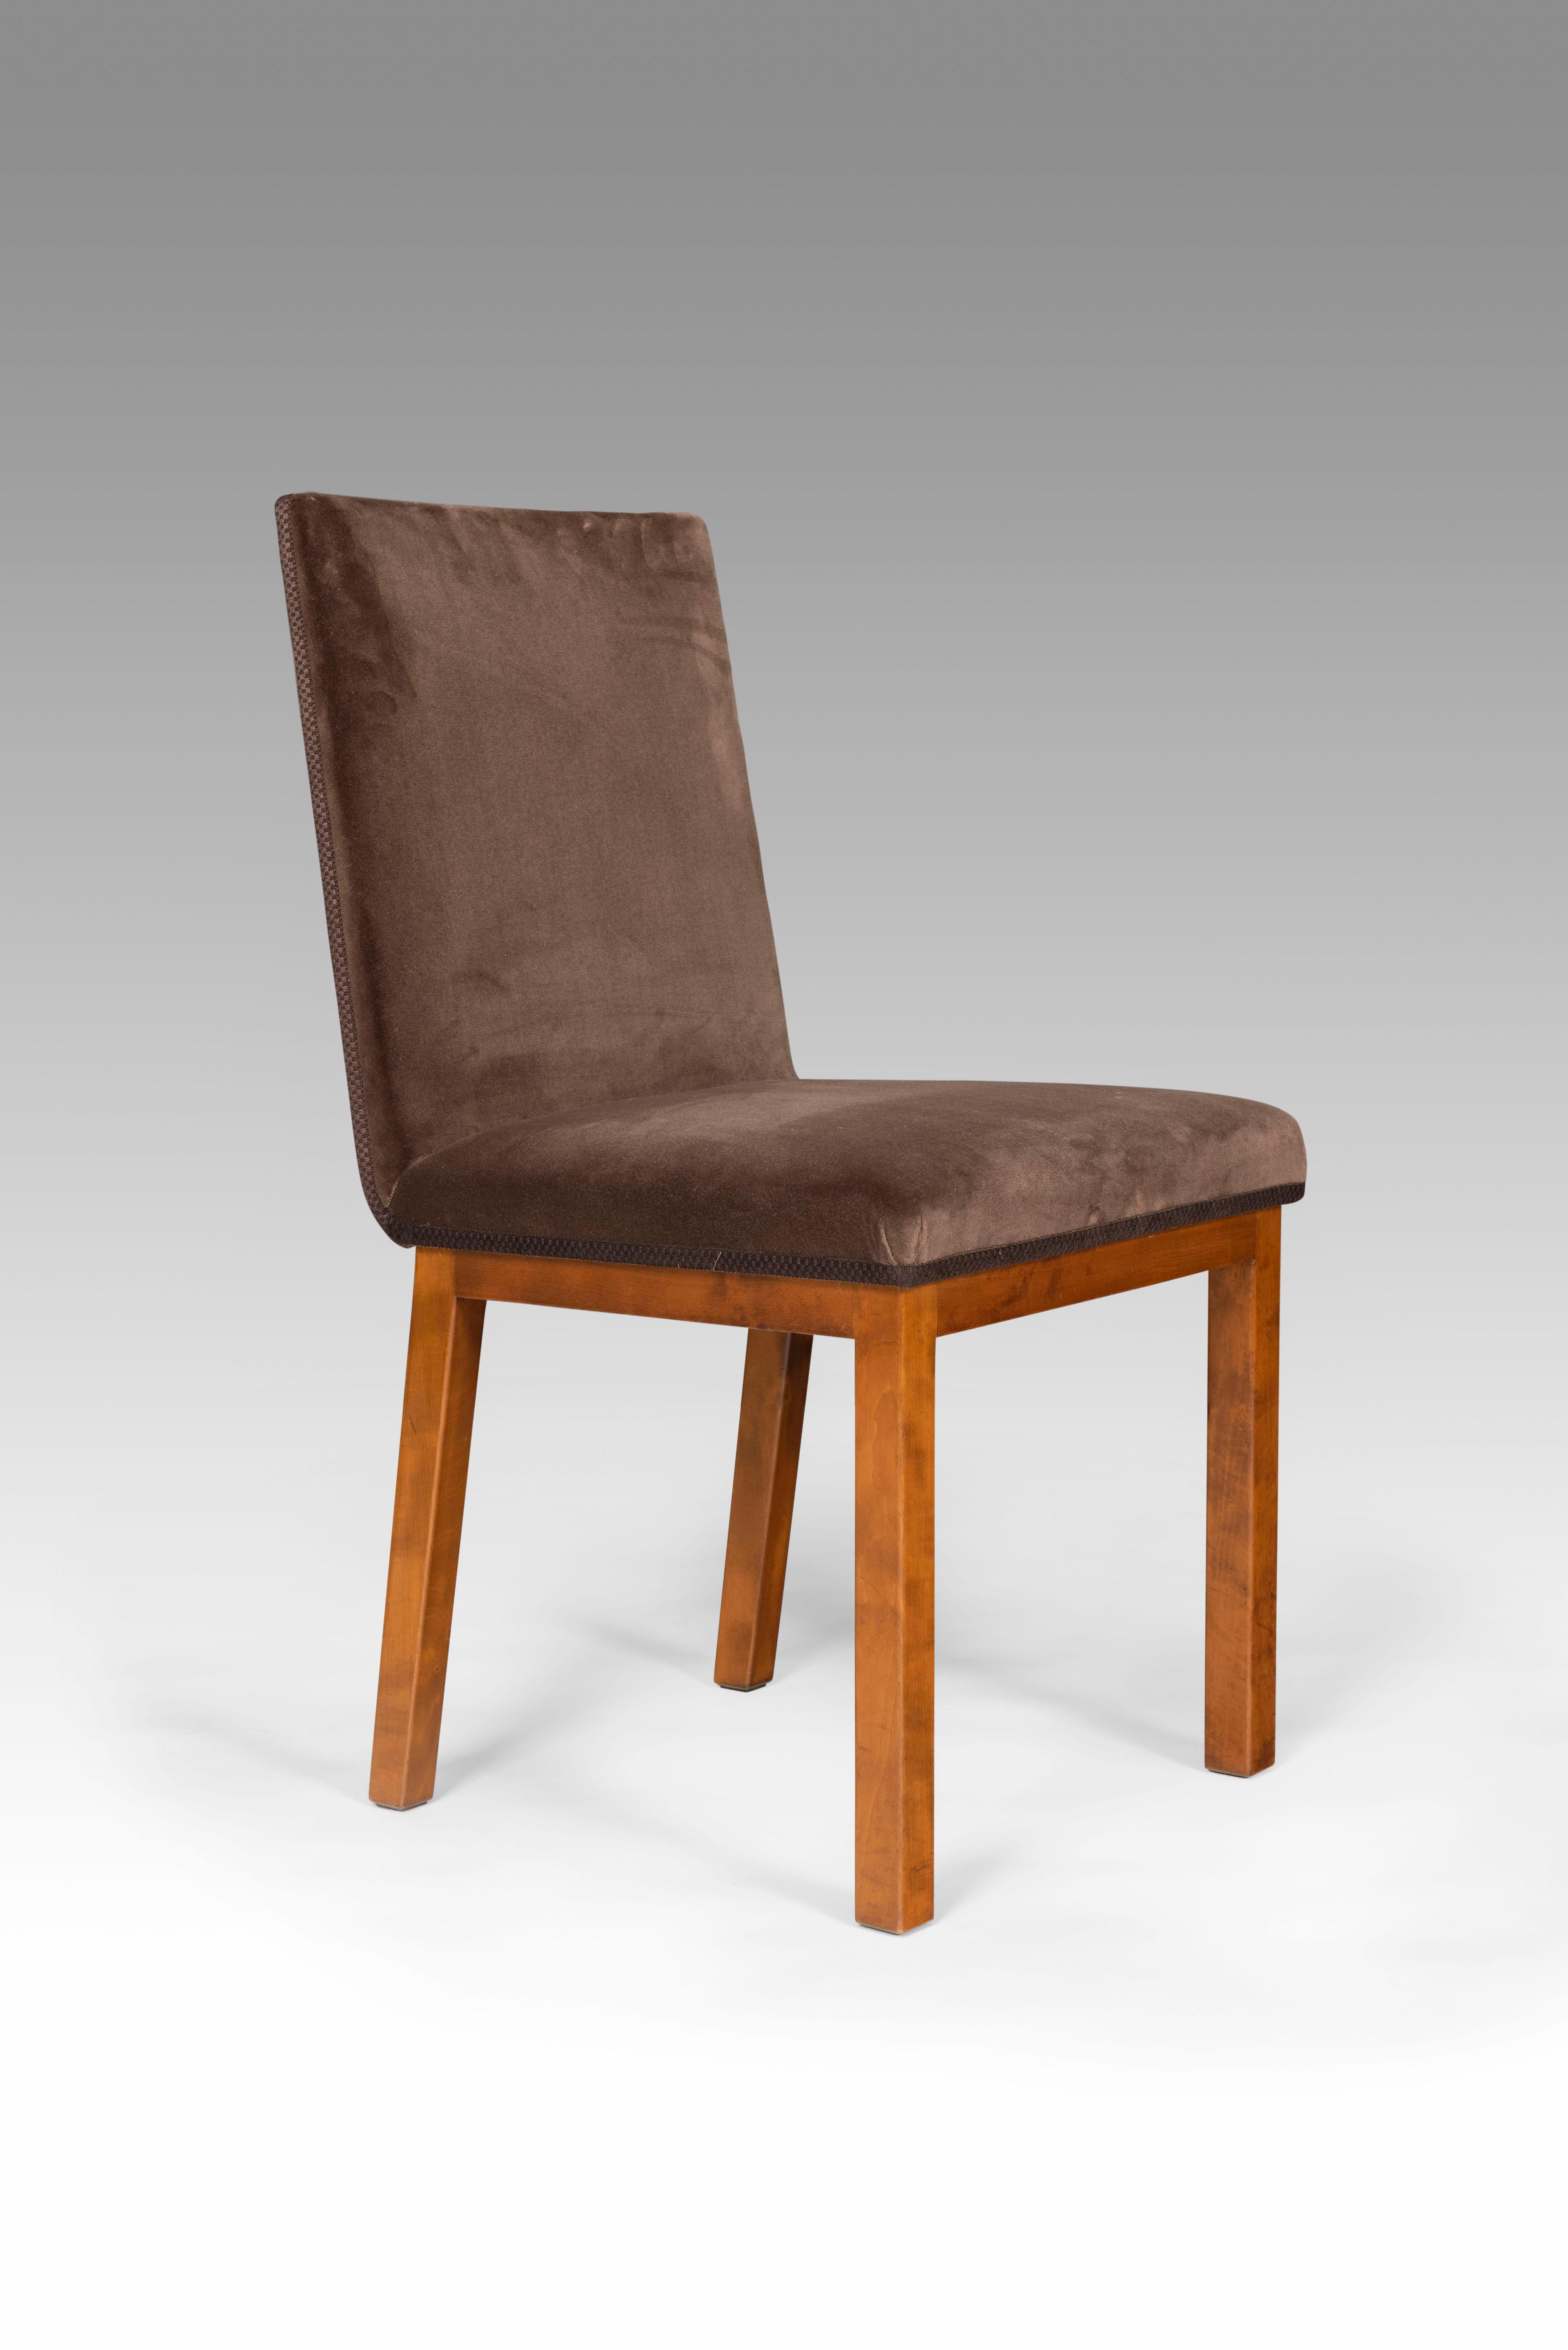 20th Century Axel Einar Hjorth Corall Set of 4 Chairs Birch and Velvet 1934 For Sale